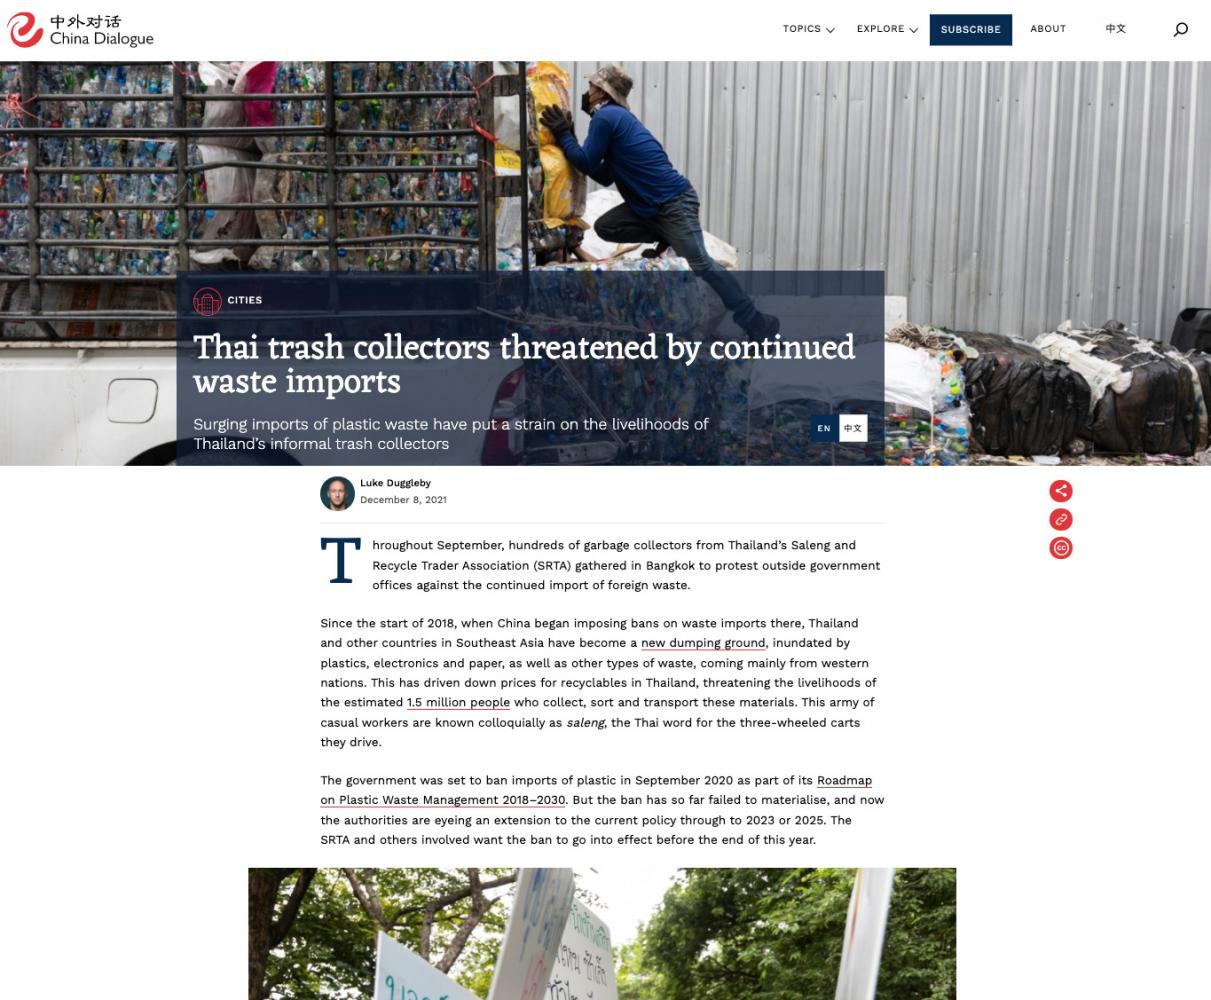 Thumbnail of Thai trash collectors threatened by continued waste imports in China Dialogue